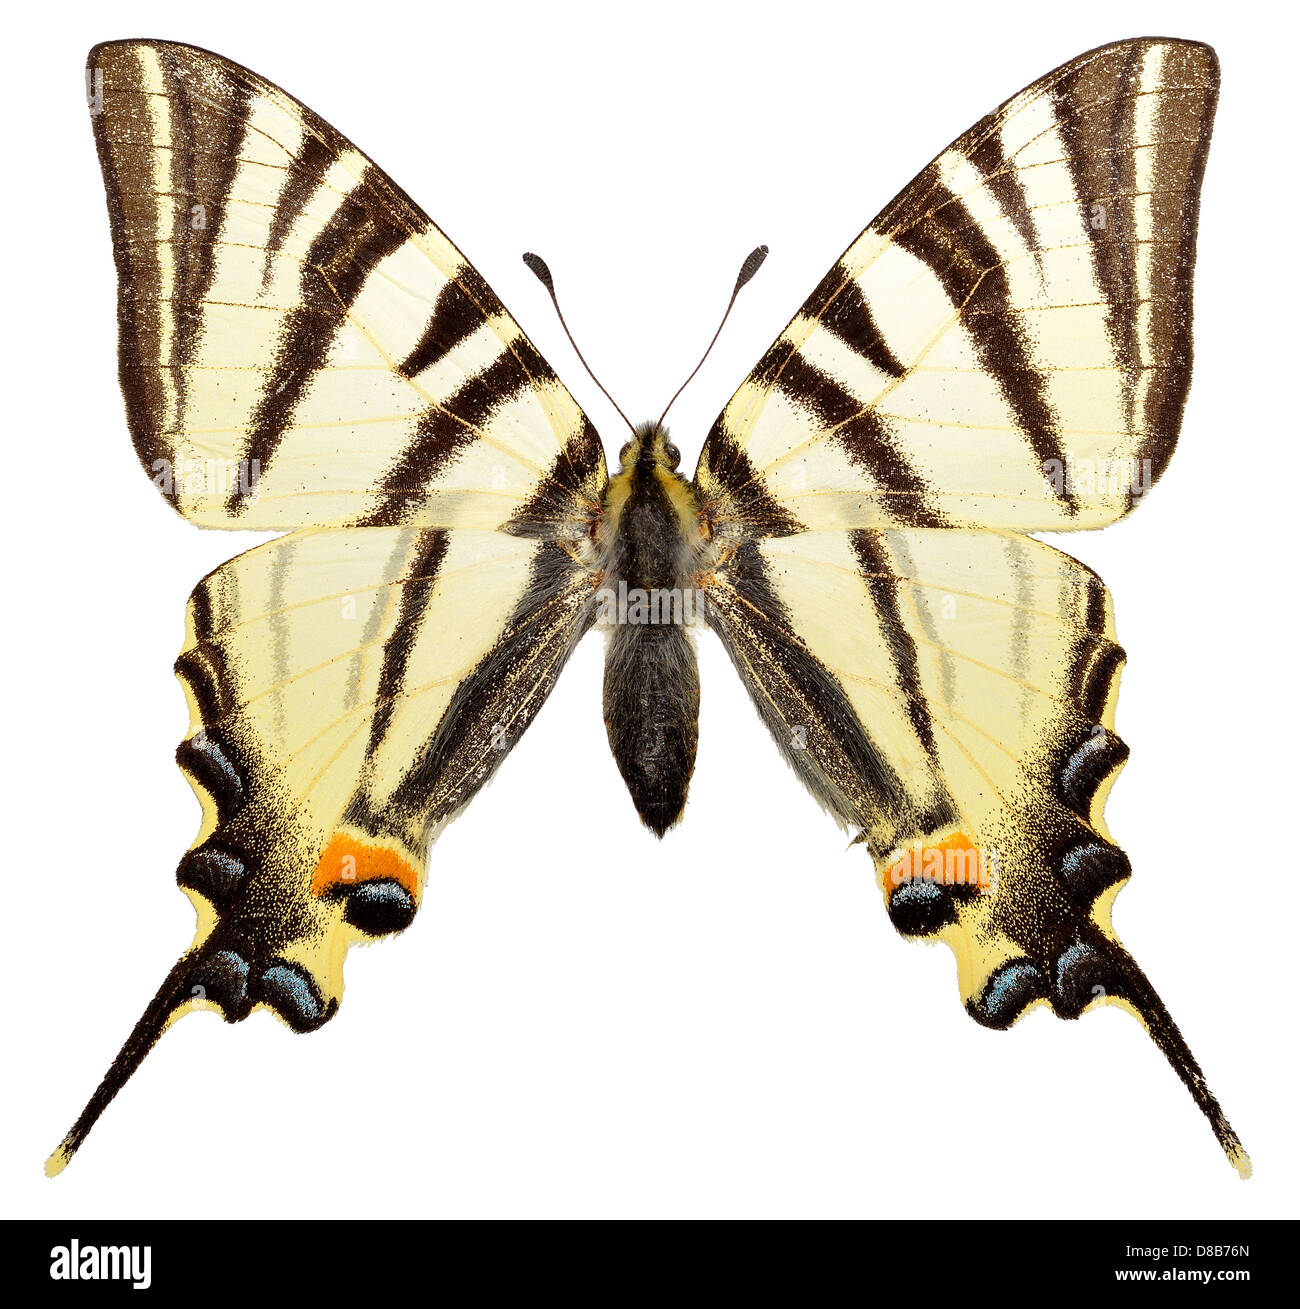 Scarce Swallowtail butterfly (Iphiclides podalirius) isolated on white background Stock Photo